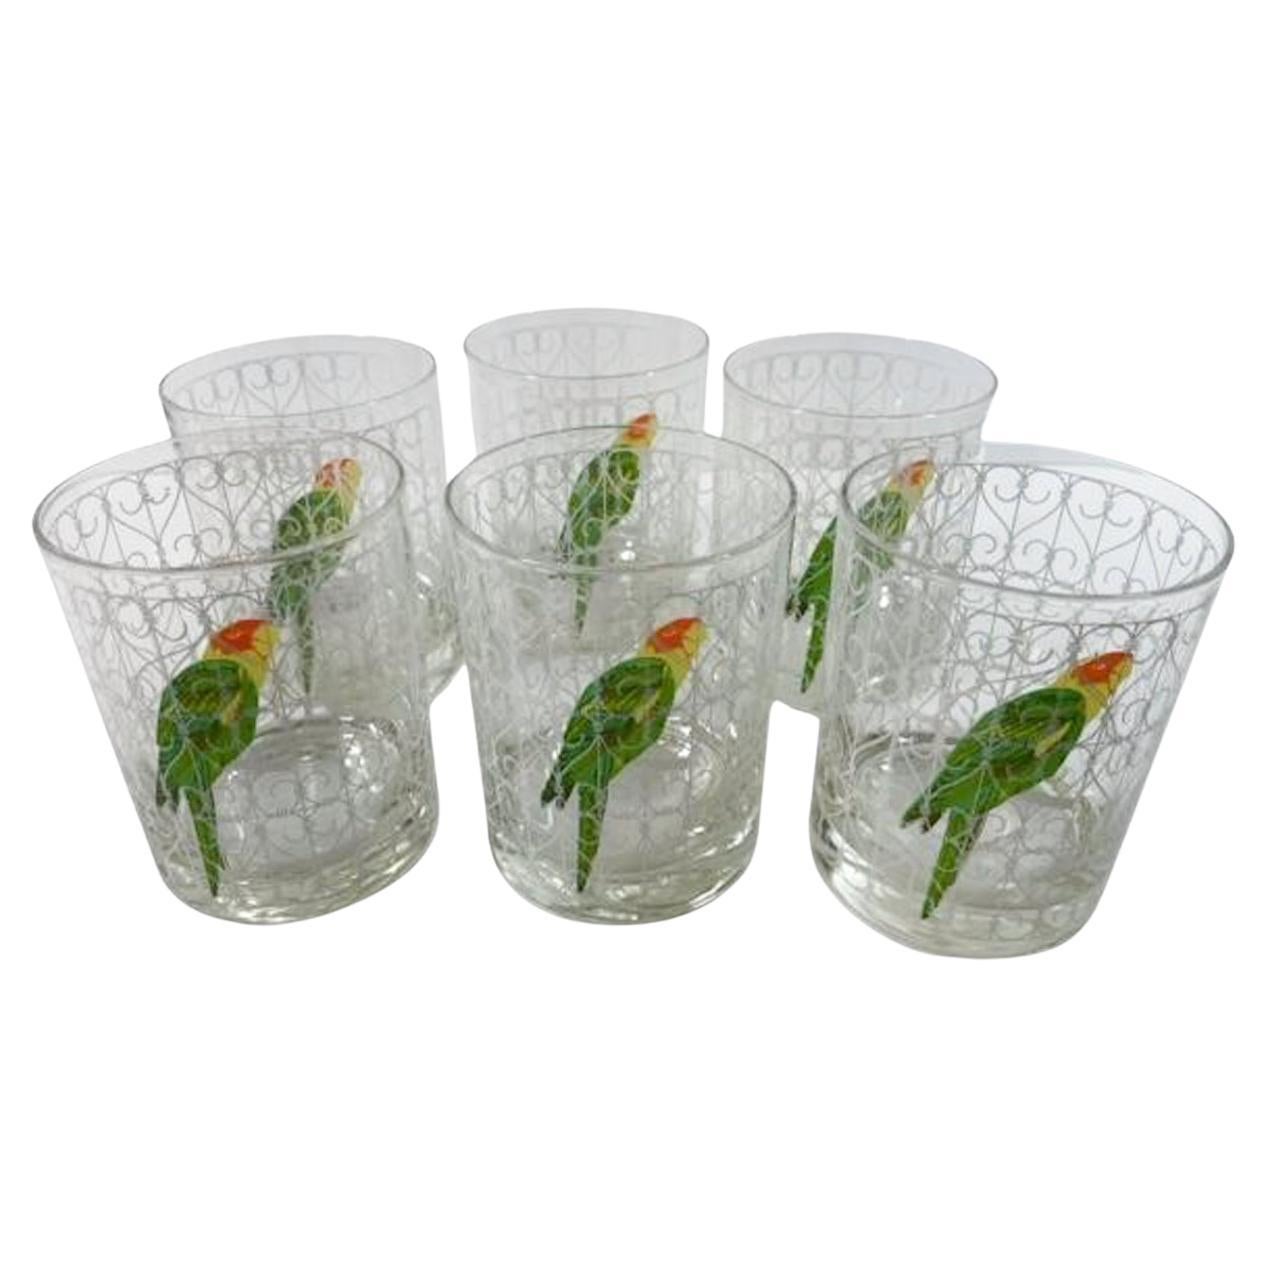 Six Vintage Rocks Glasses with a Parrot in a White Scrollwork Cage by Cera Glass